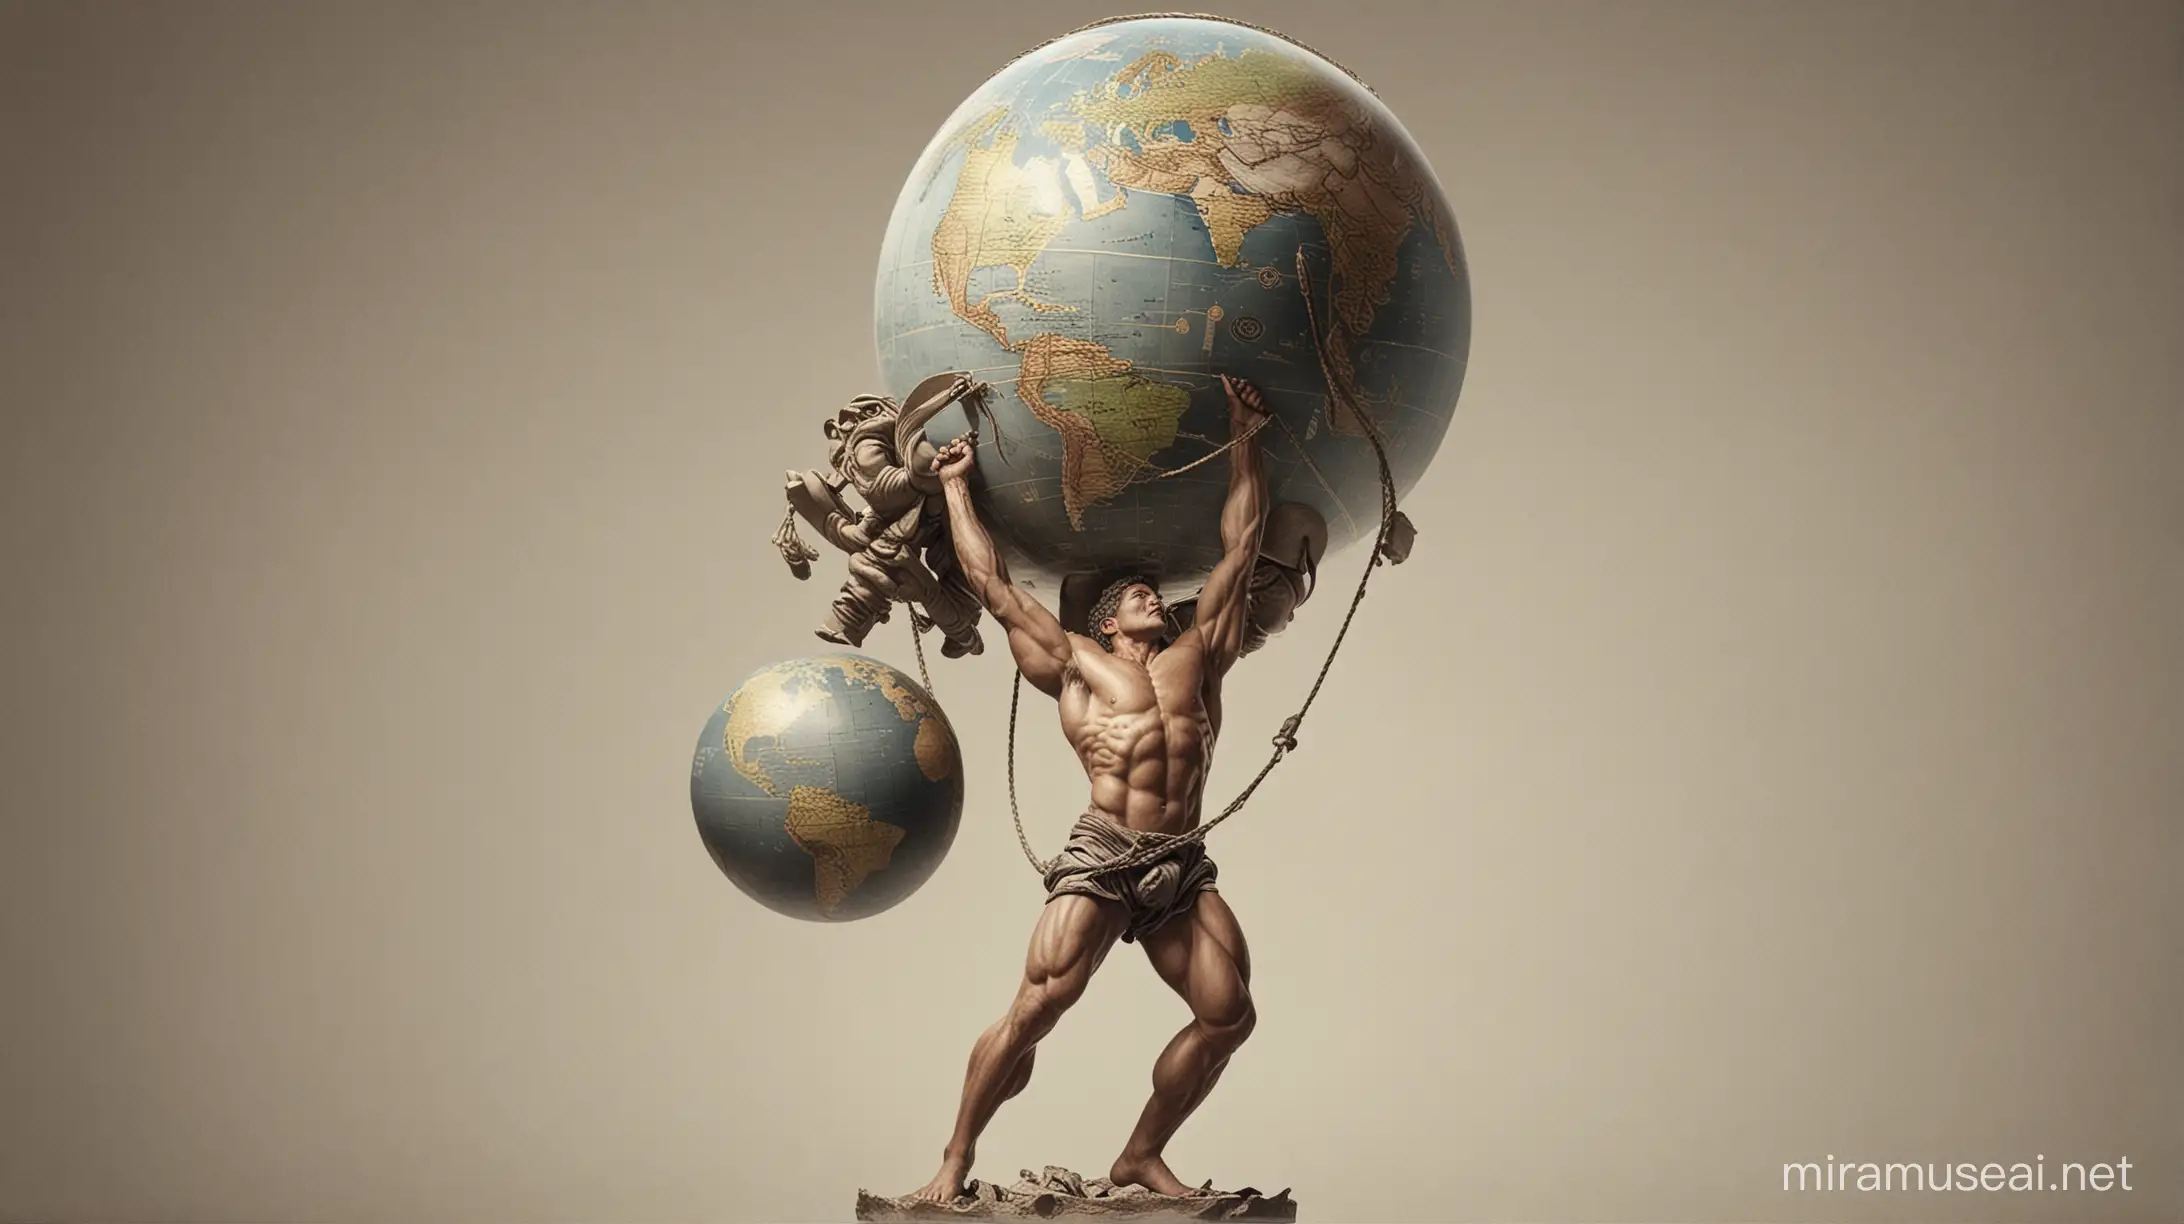 Atlas Carrying the World Sculpture Mythological Titan Supporting Earth Globe